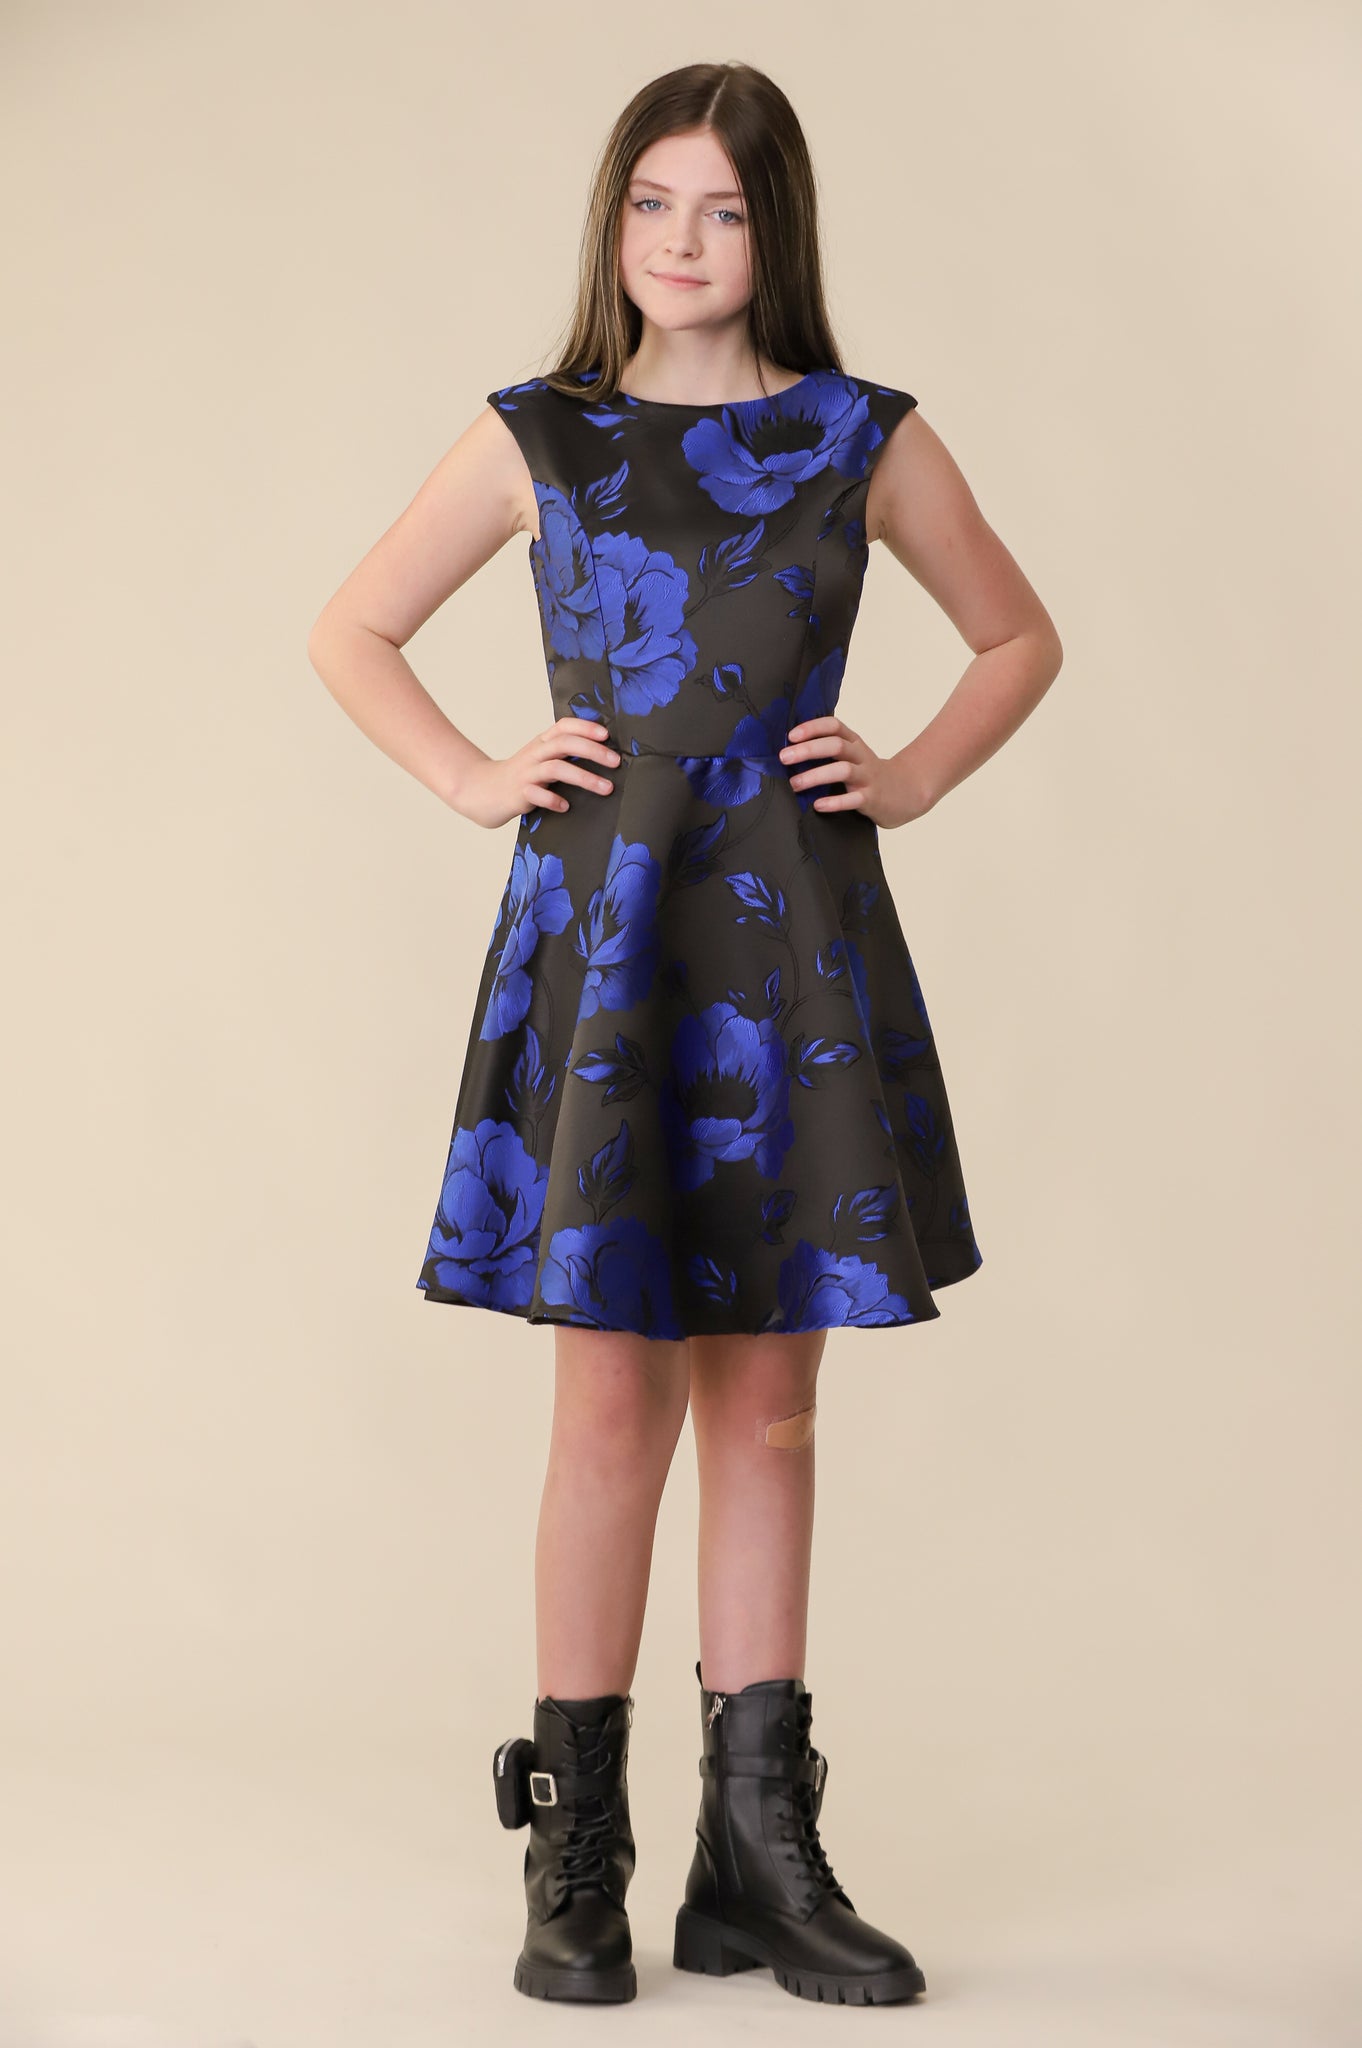 This is an all over satin, cap sleeve dress in a black and cobalt floral print pink with non-stretch material, zipper back, and longer length detailing. This dress is perfect for any religious event like bat mitzvah, cotillion or church service. 